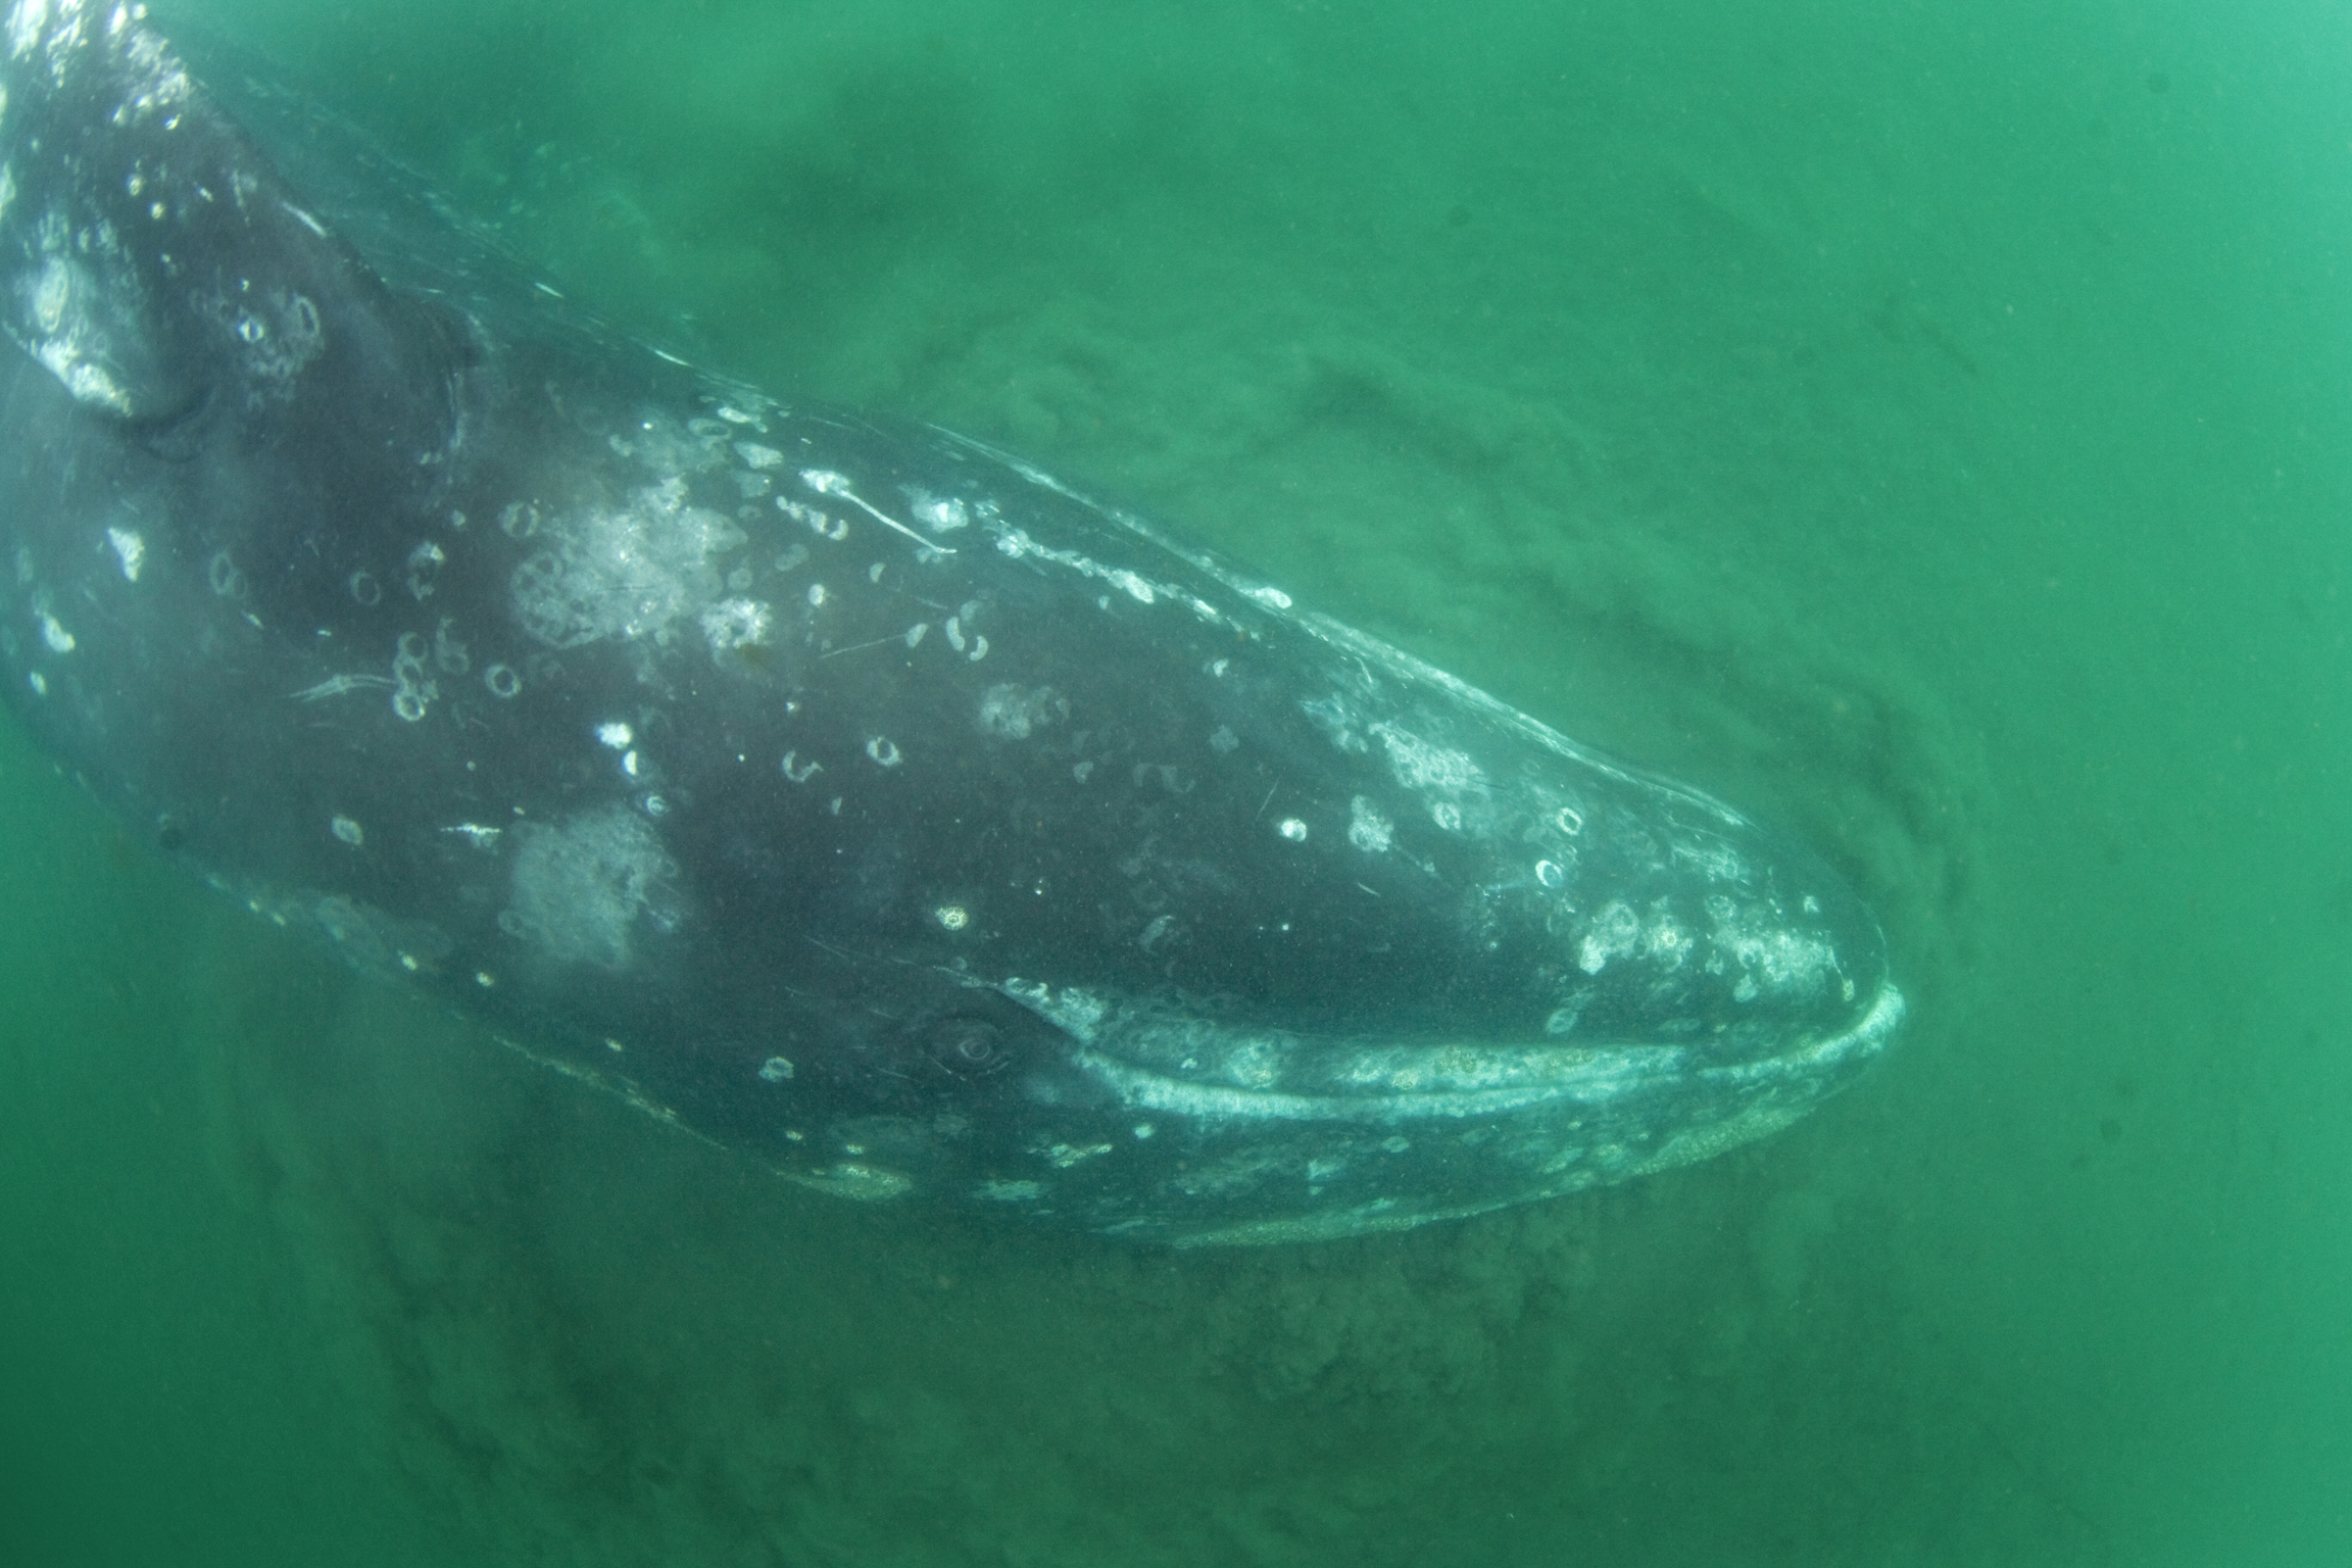 A Gray whale feeds on the benthic crustaceans of San Ignacio lagoon in Mexico. By turning its body and then submerging part of its mouth into the sediment it scoops up its prey.